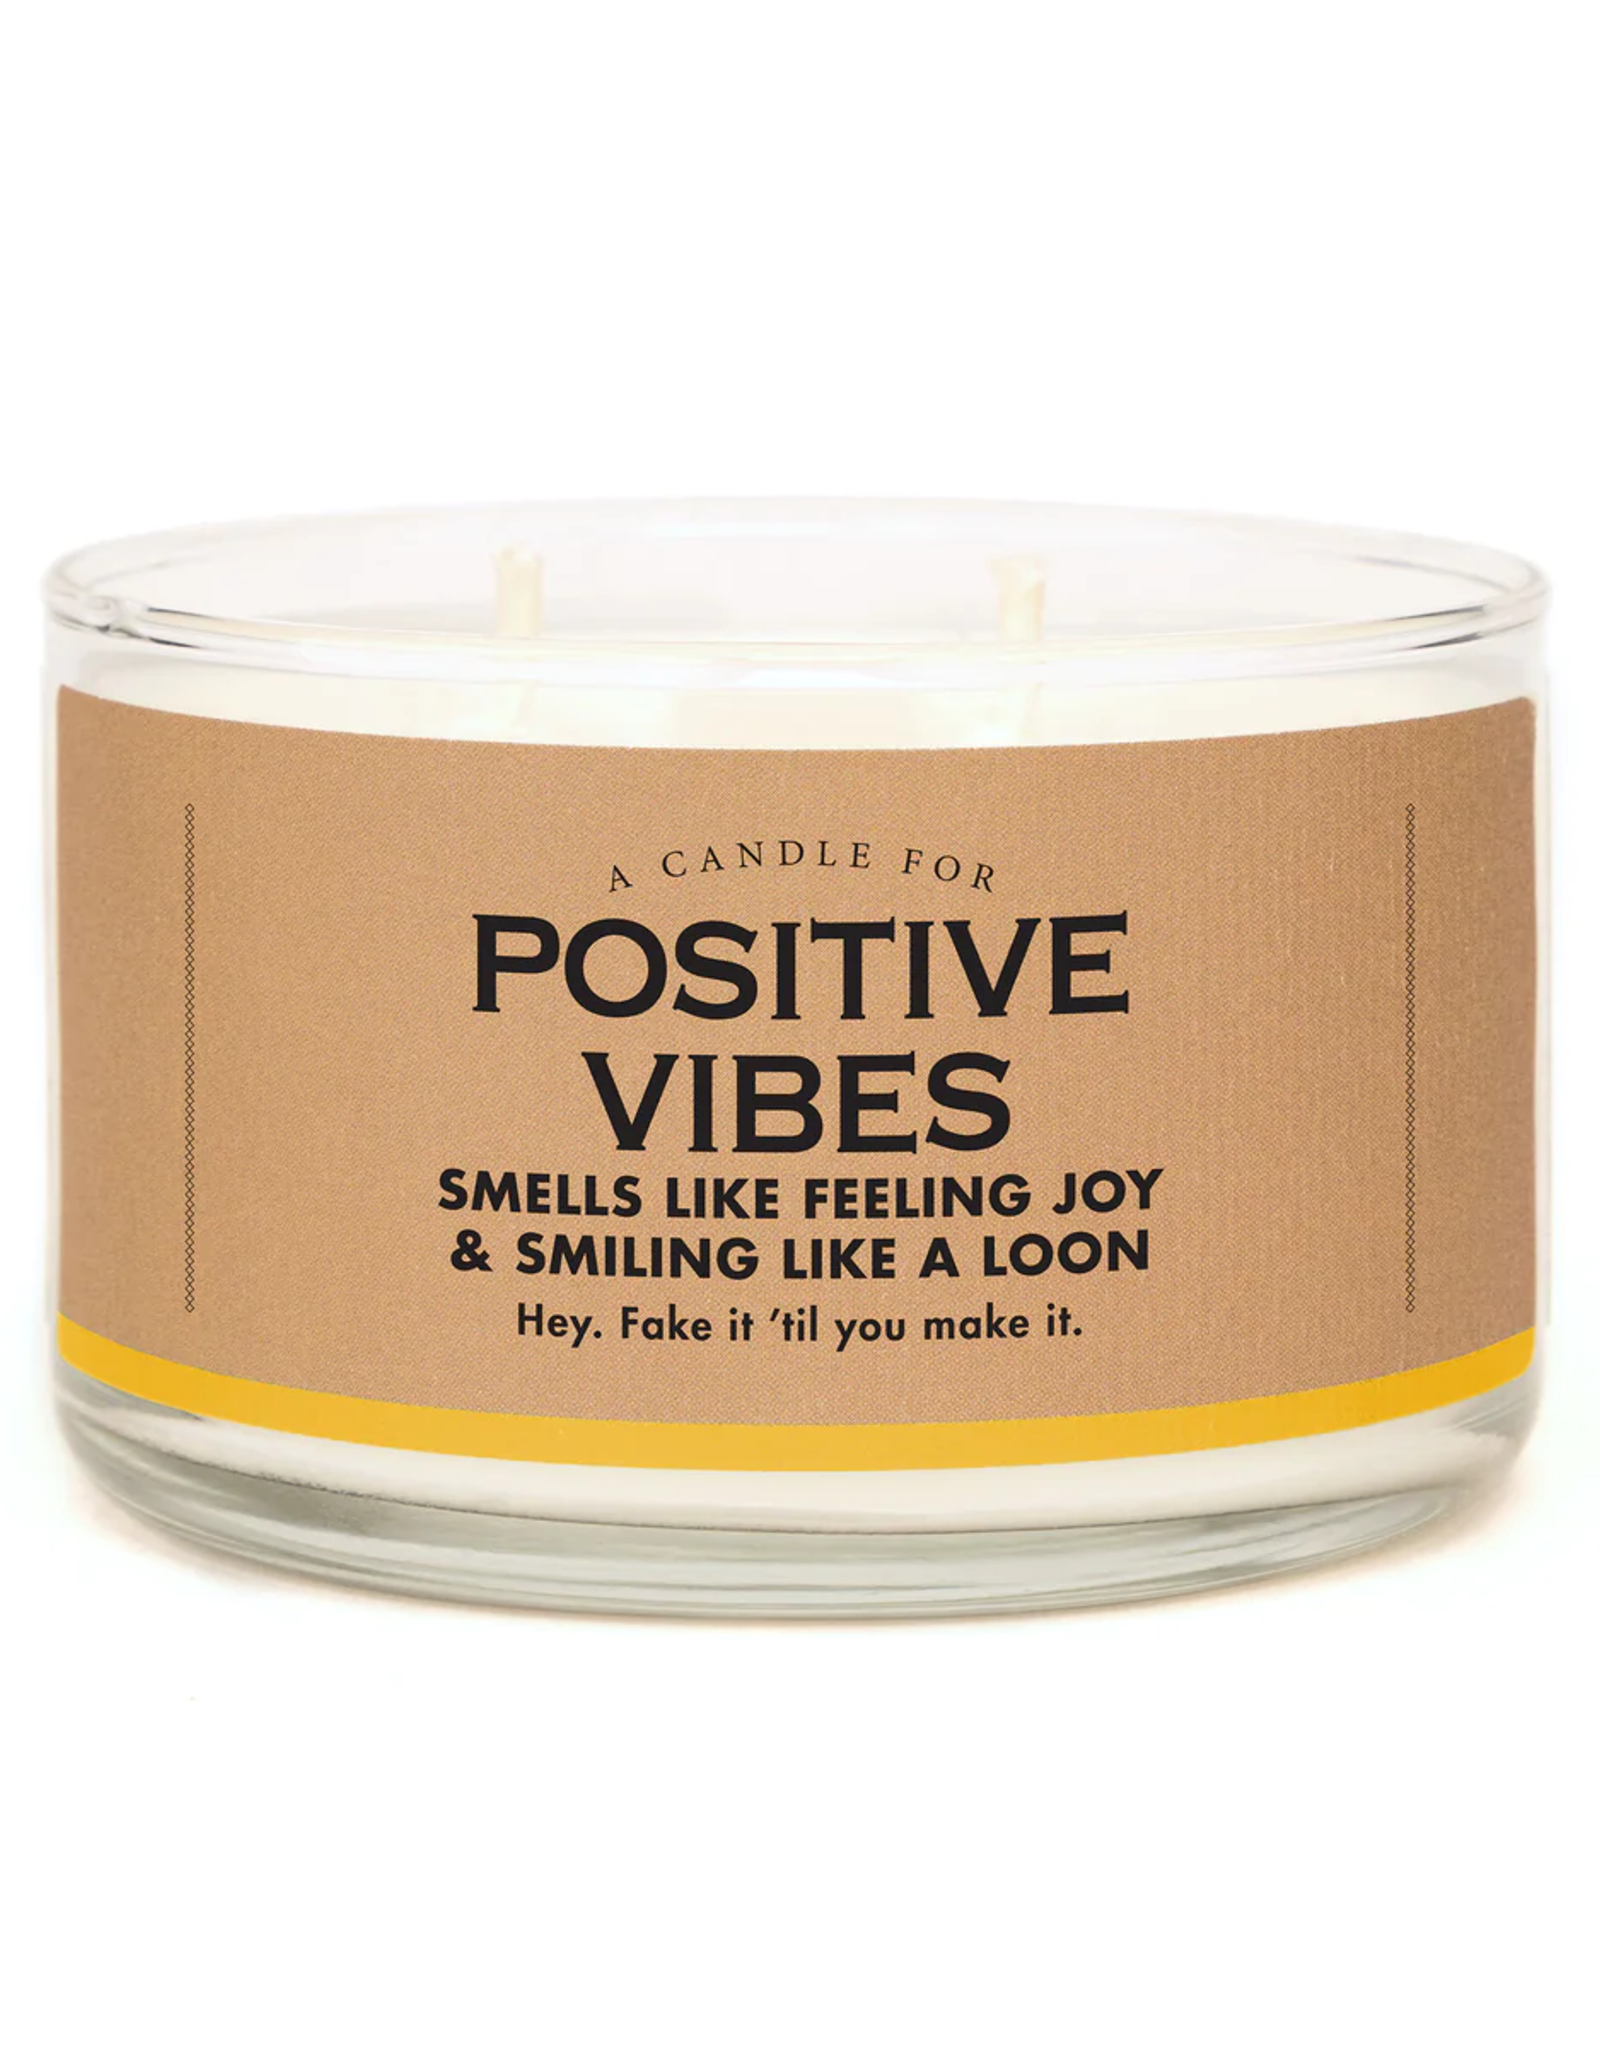 A Candle for Positive Vibes